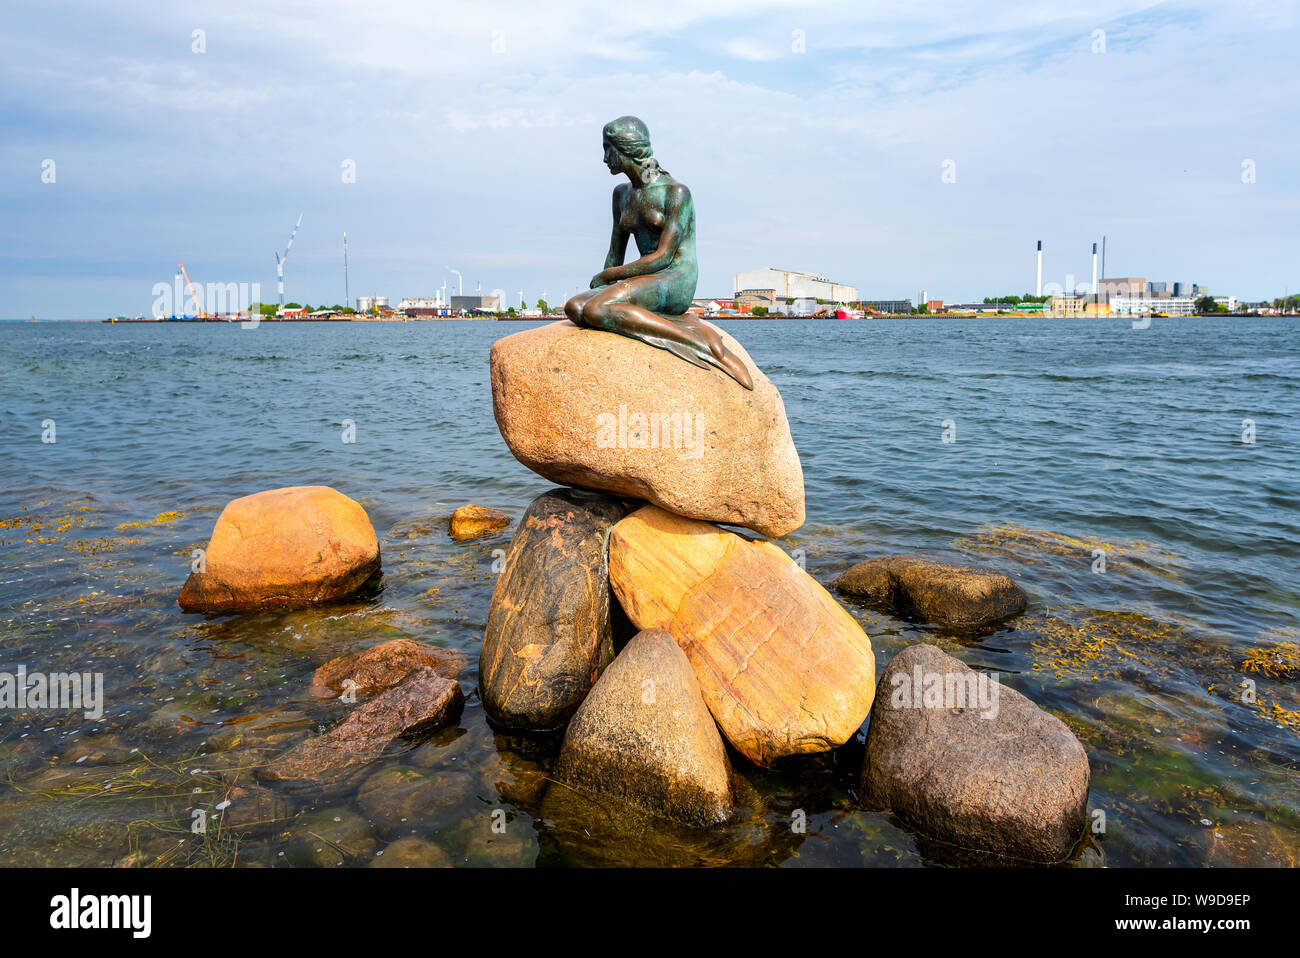 Statue of The Little Mermaid at Langelinie in Copenhagen, Denmark.The sculpture is displayed on a rock by the waterside at the Langelinie promenade in Stock Photo